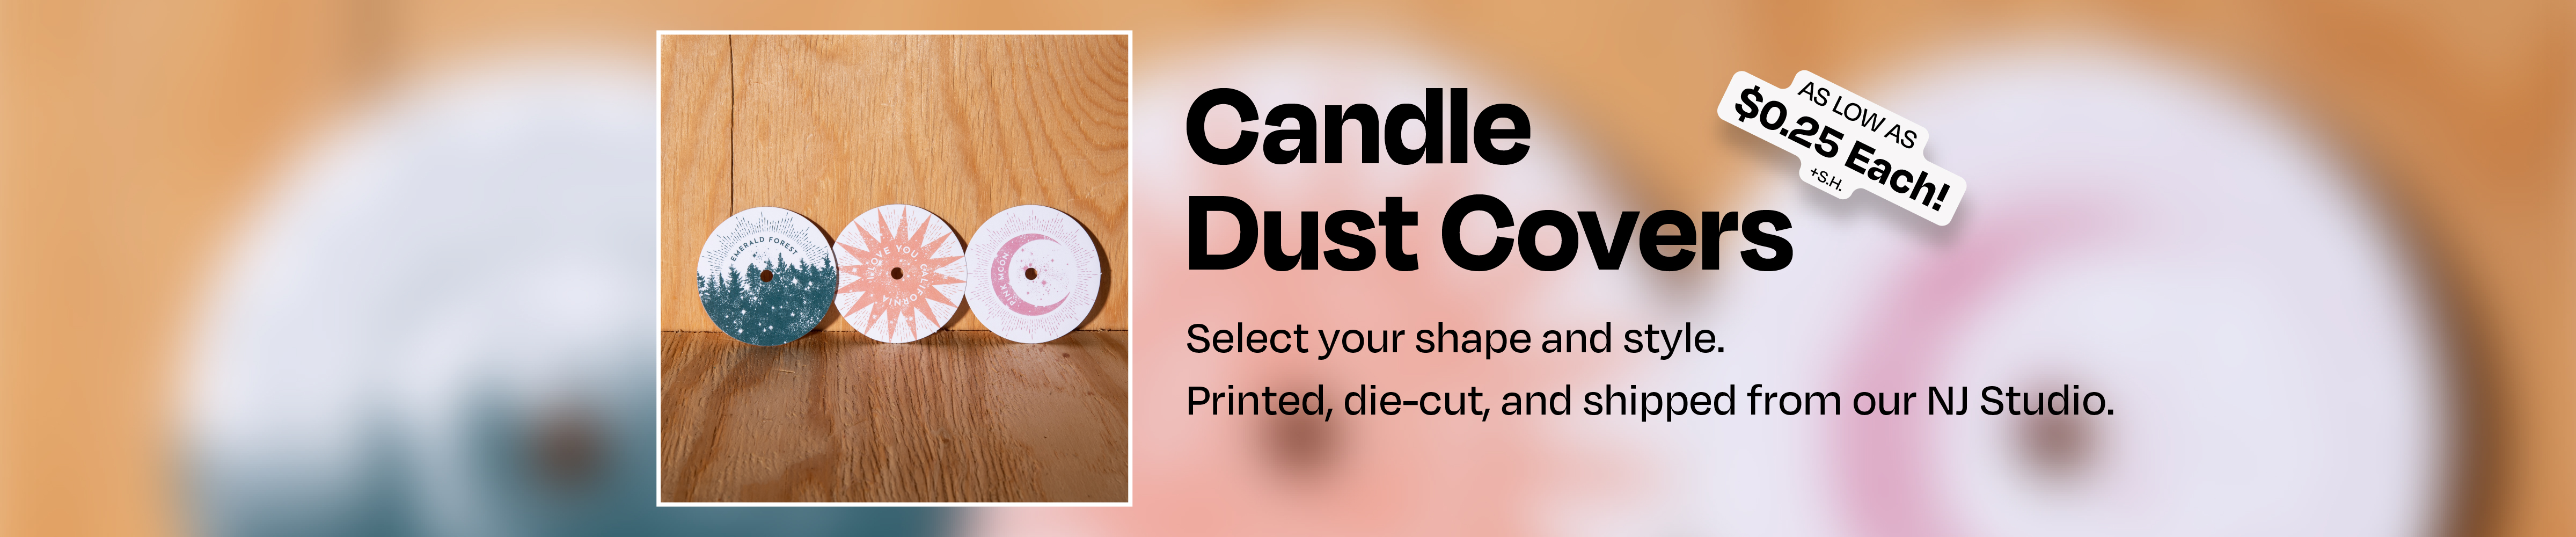 Candle Dust Covers